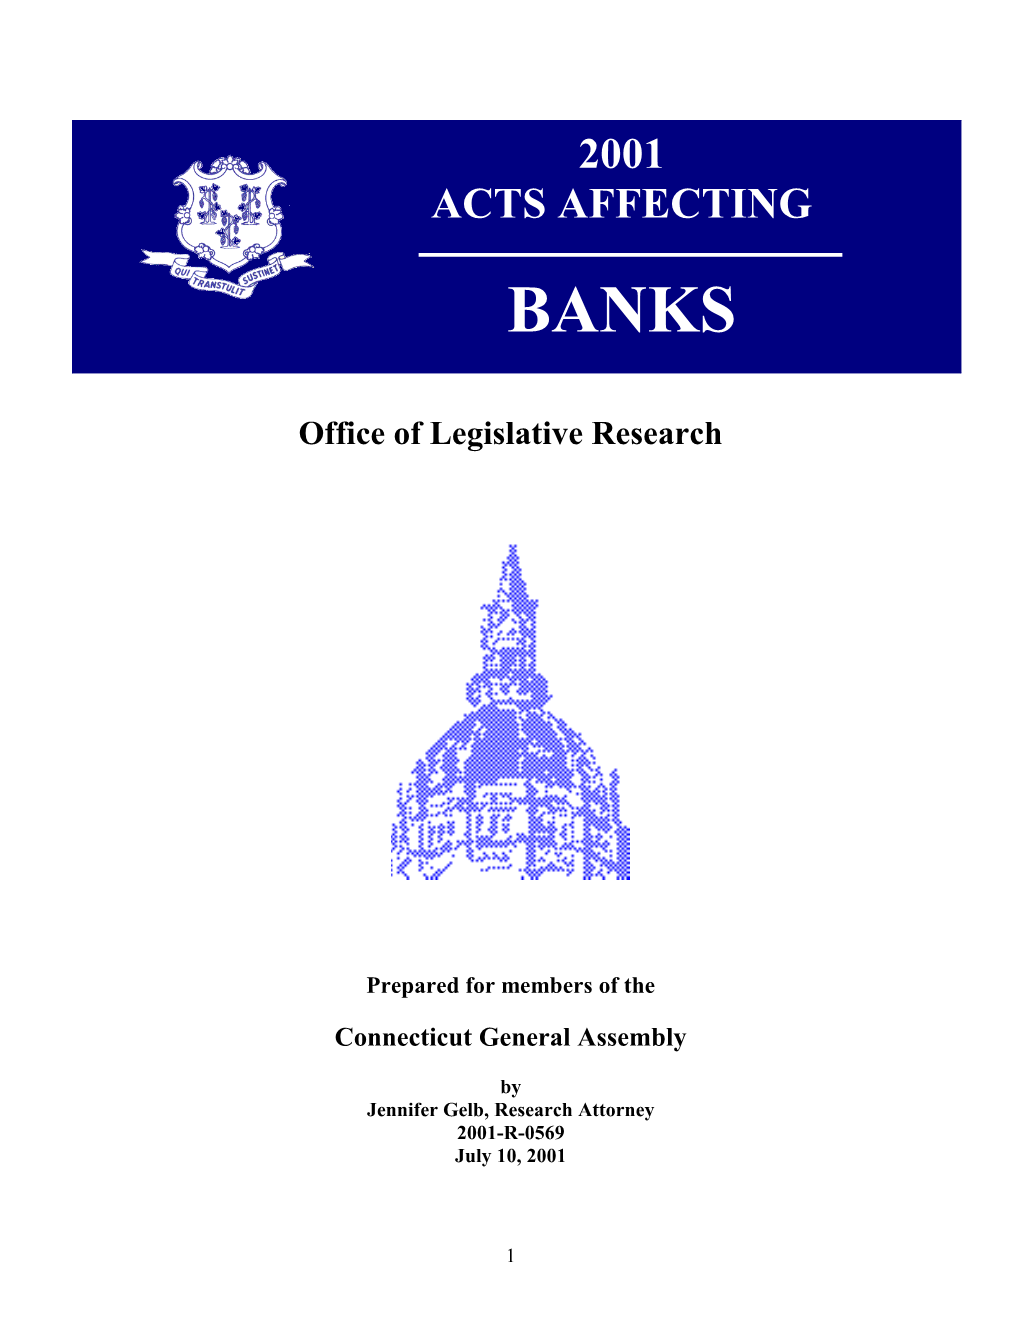 Act Affecting Banking